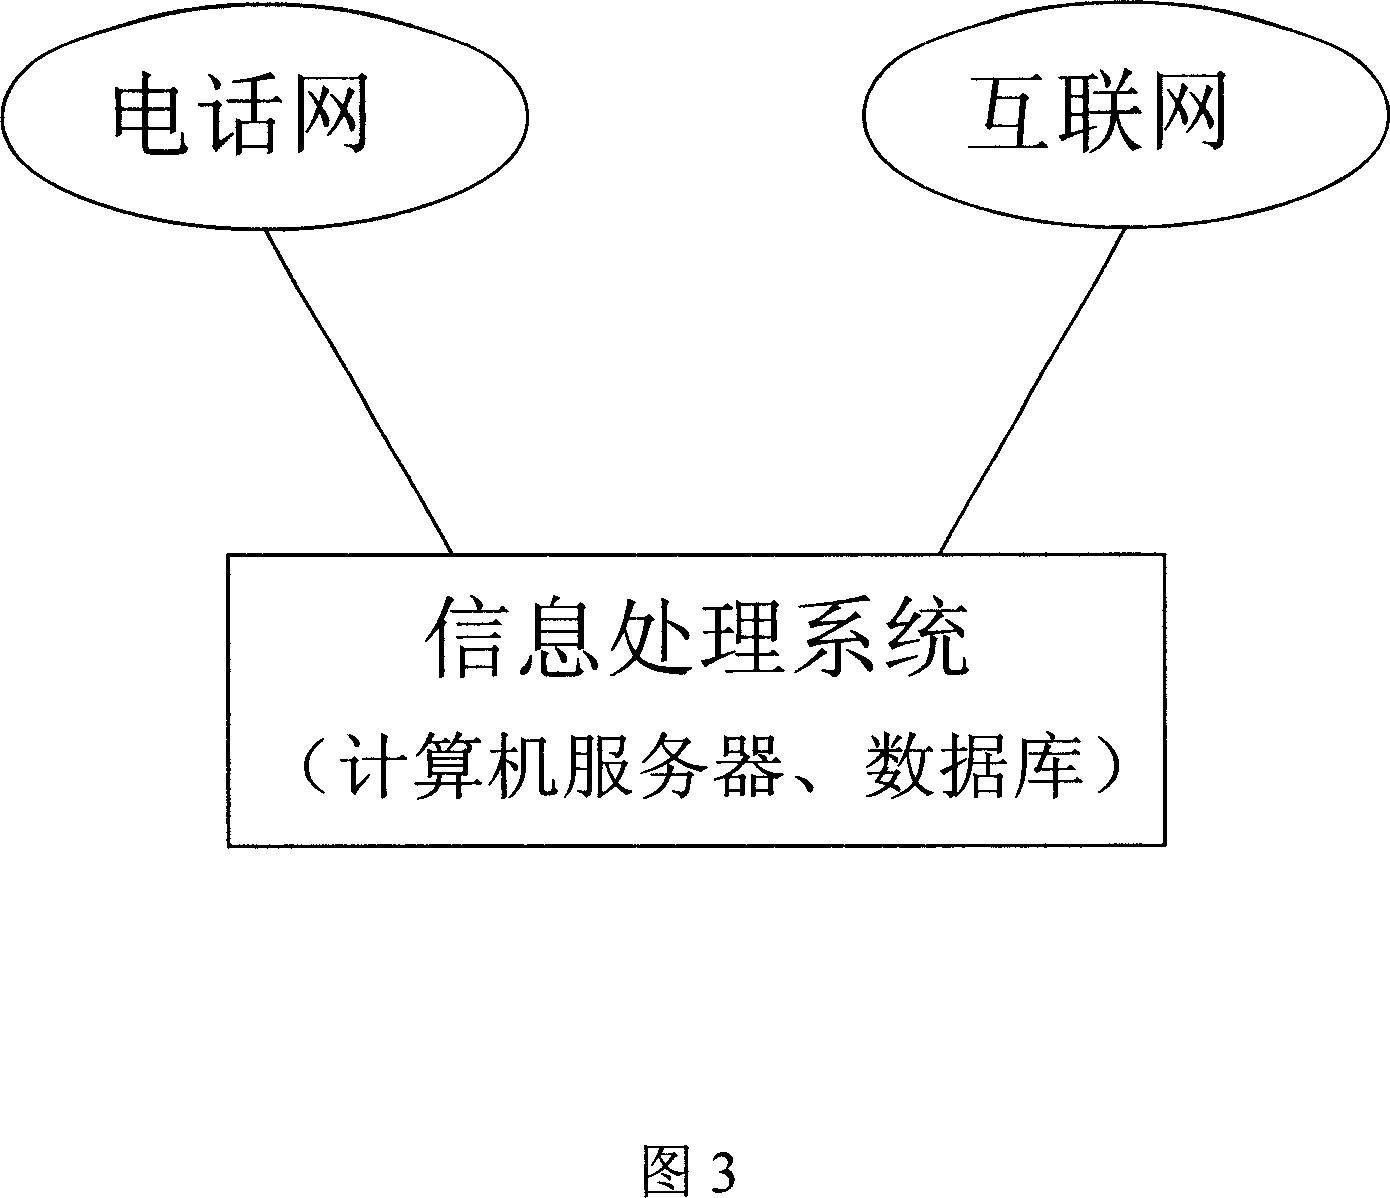 A method for providing the phone network communication information to the computers in the Internet and its system